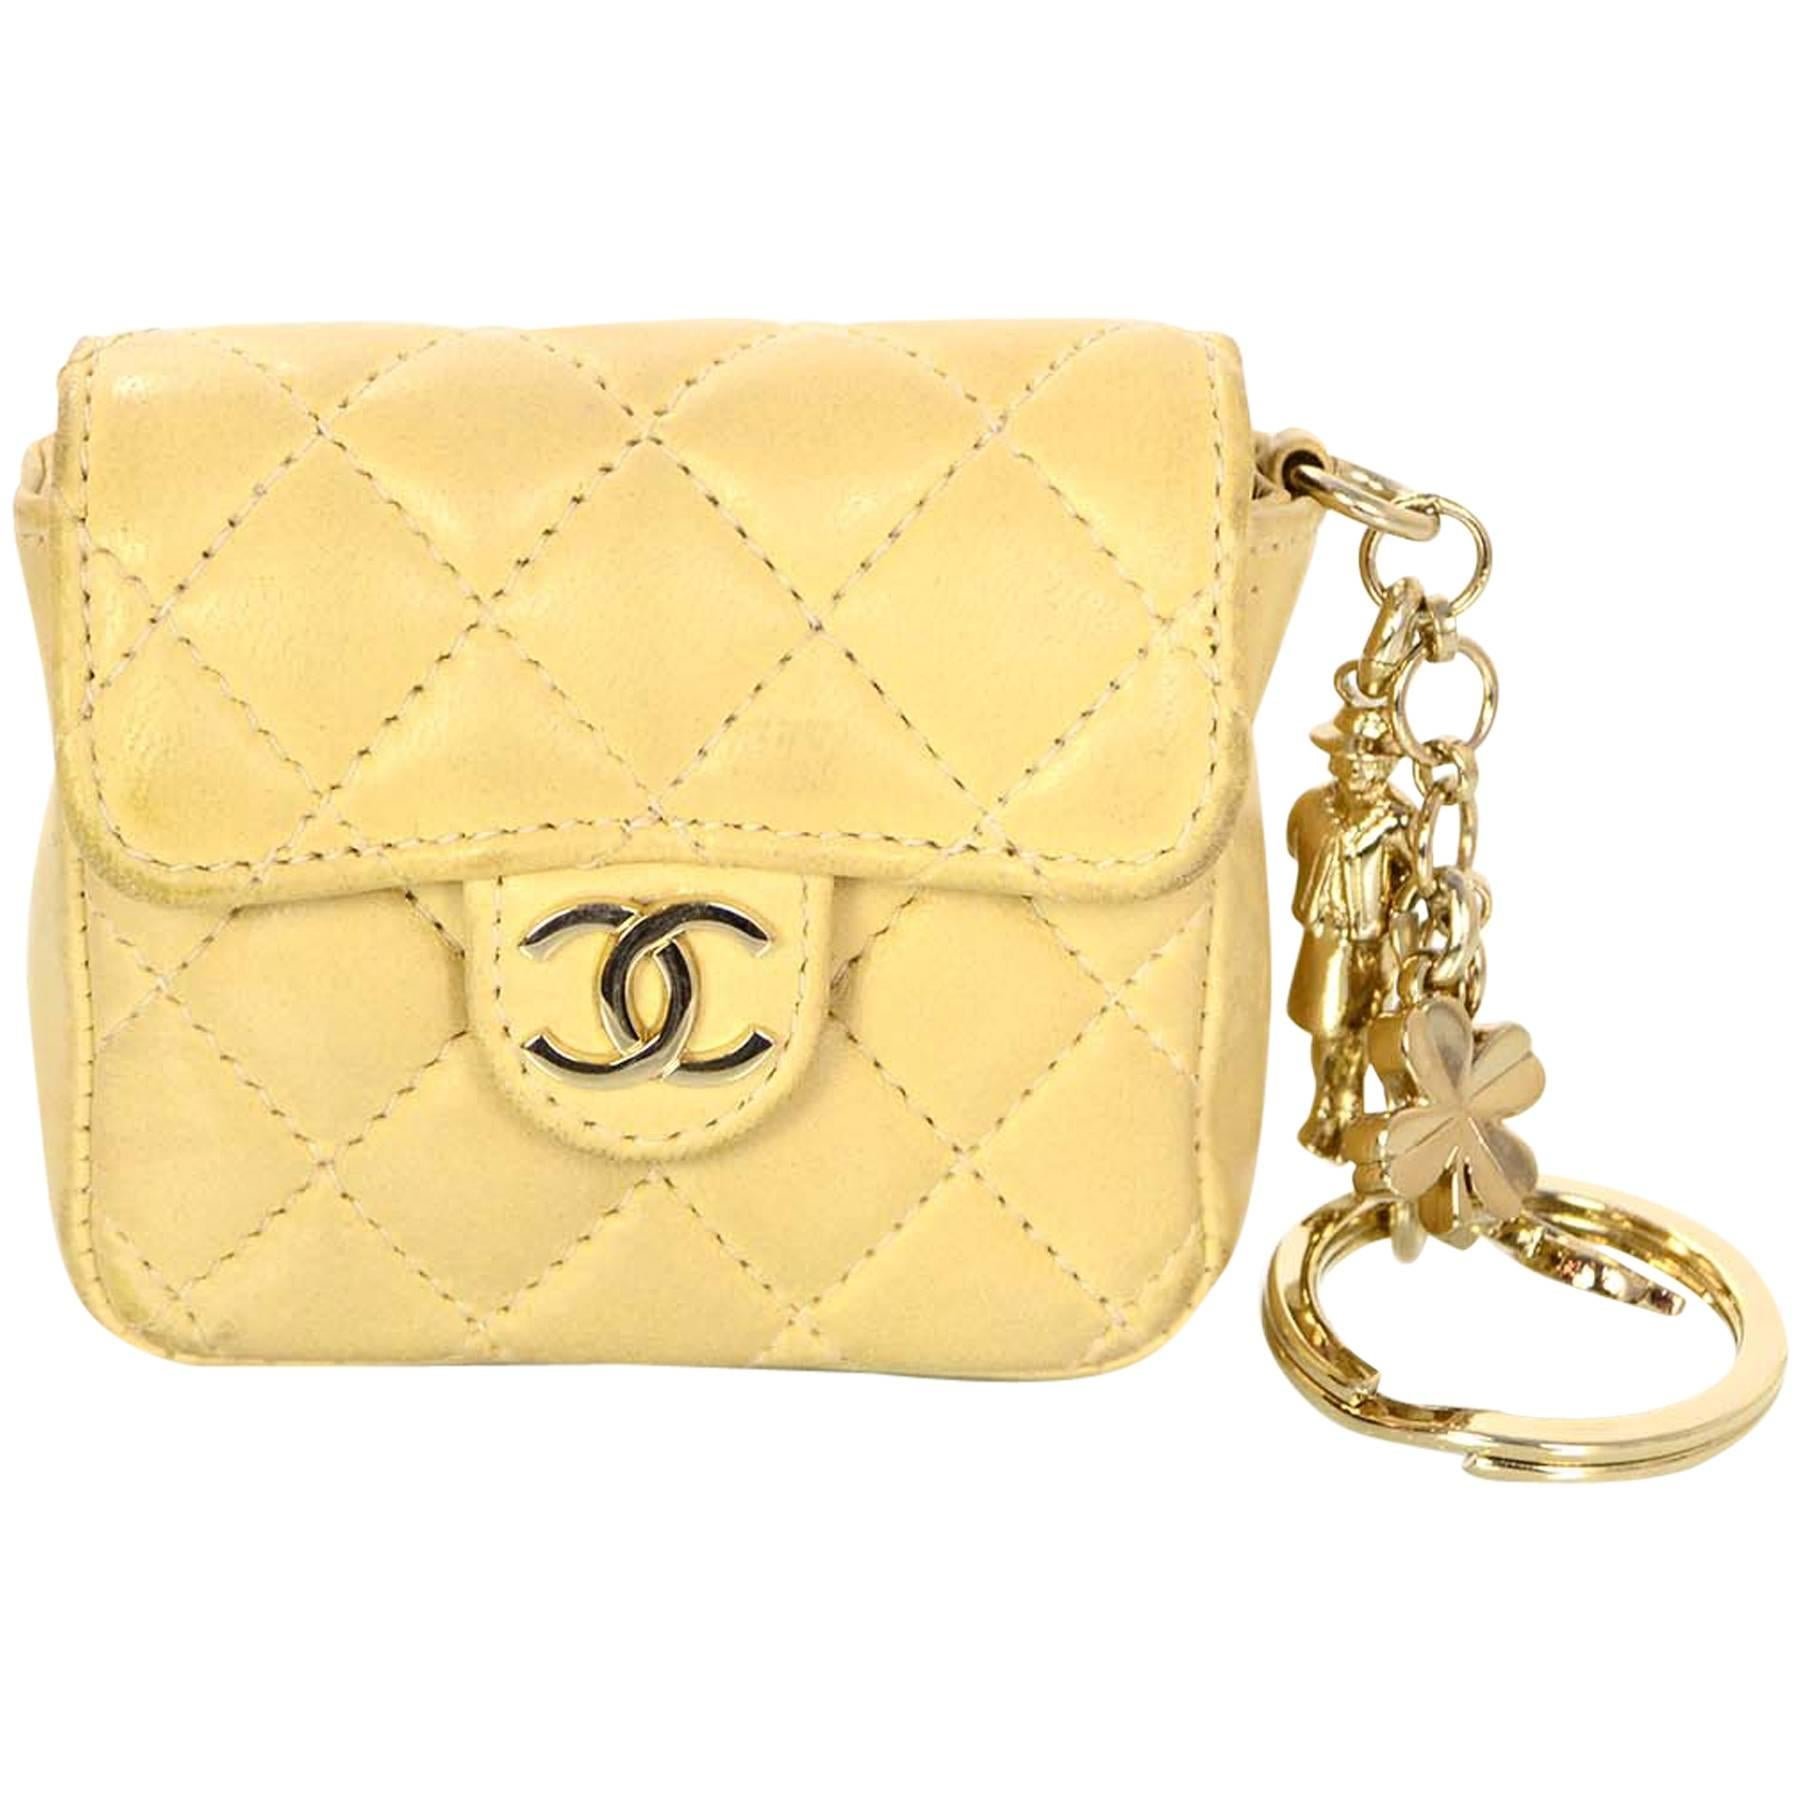 Chanel Beige Quilted Mini Flap Bag Key Ring/ Bag Charm 